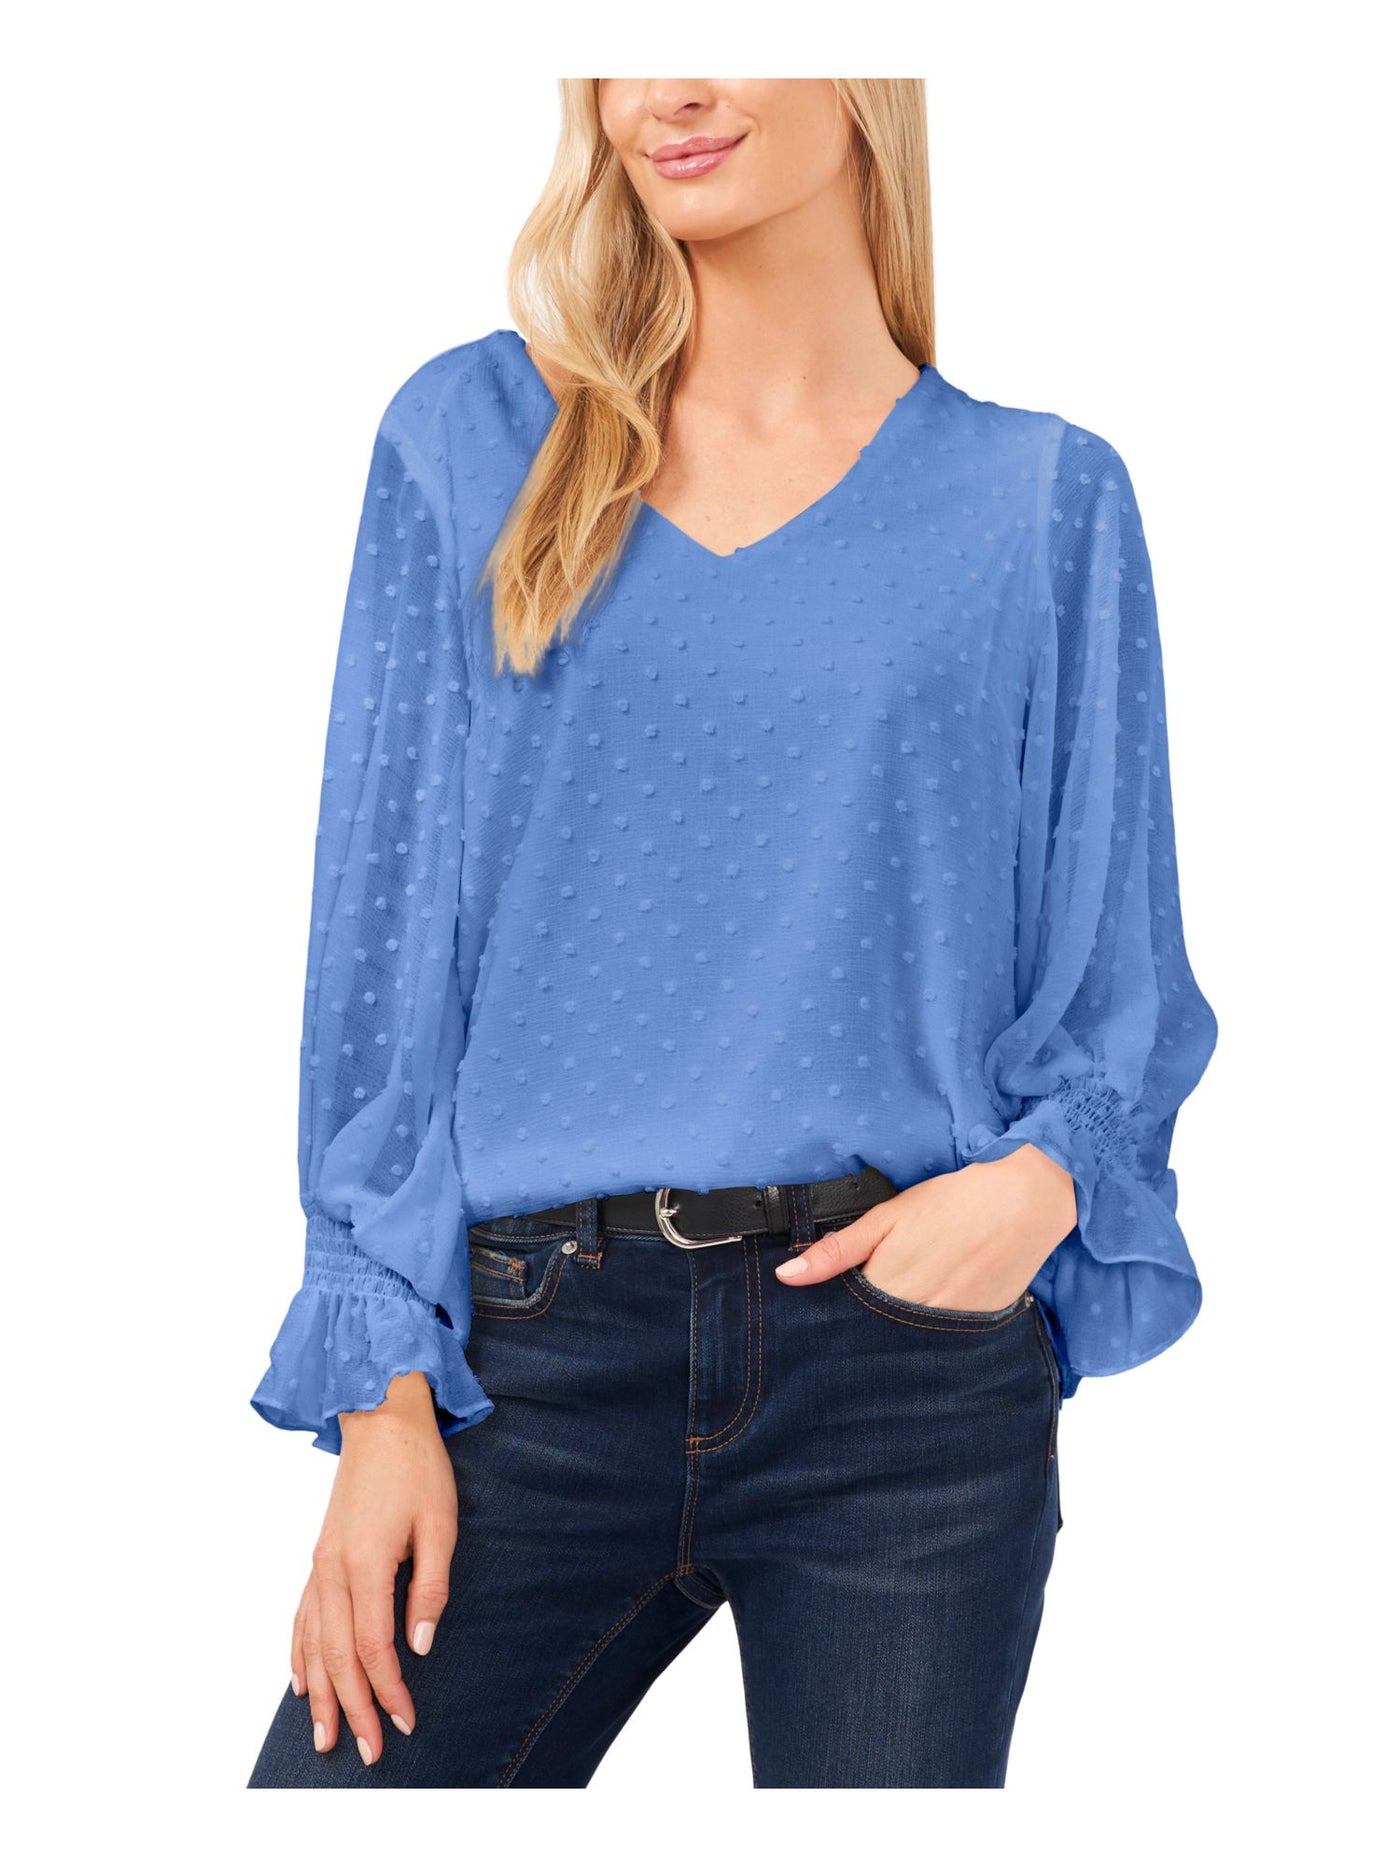 VINCE CAMUTO Womens Blue Smocked Lined Sheer Darted Long Sleeve V Neck Blouse XS